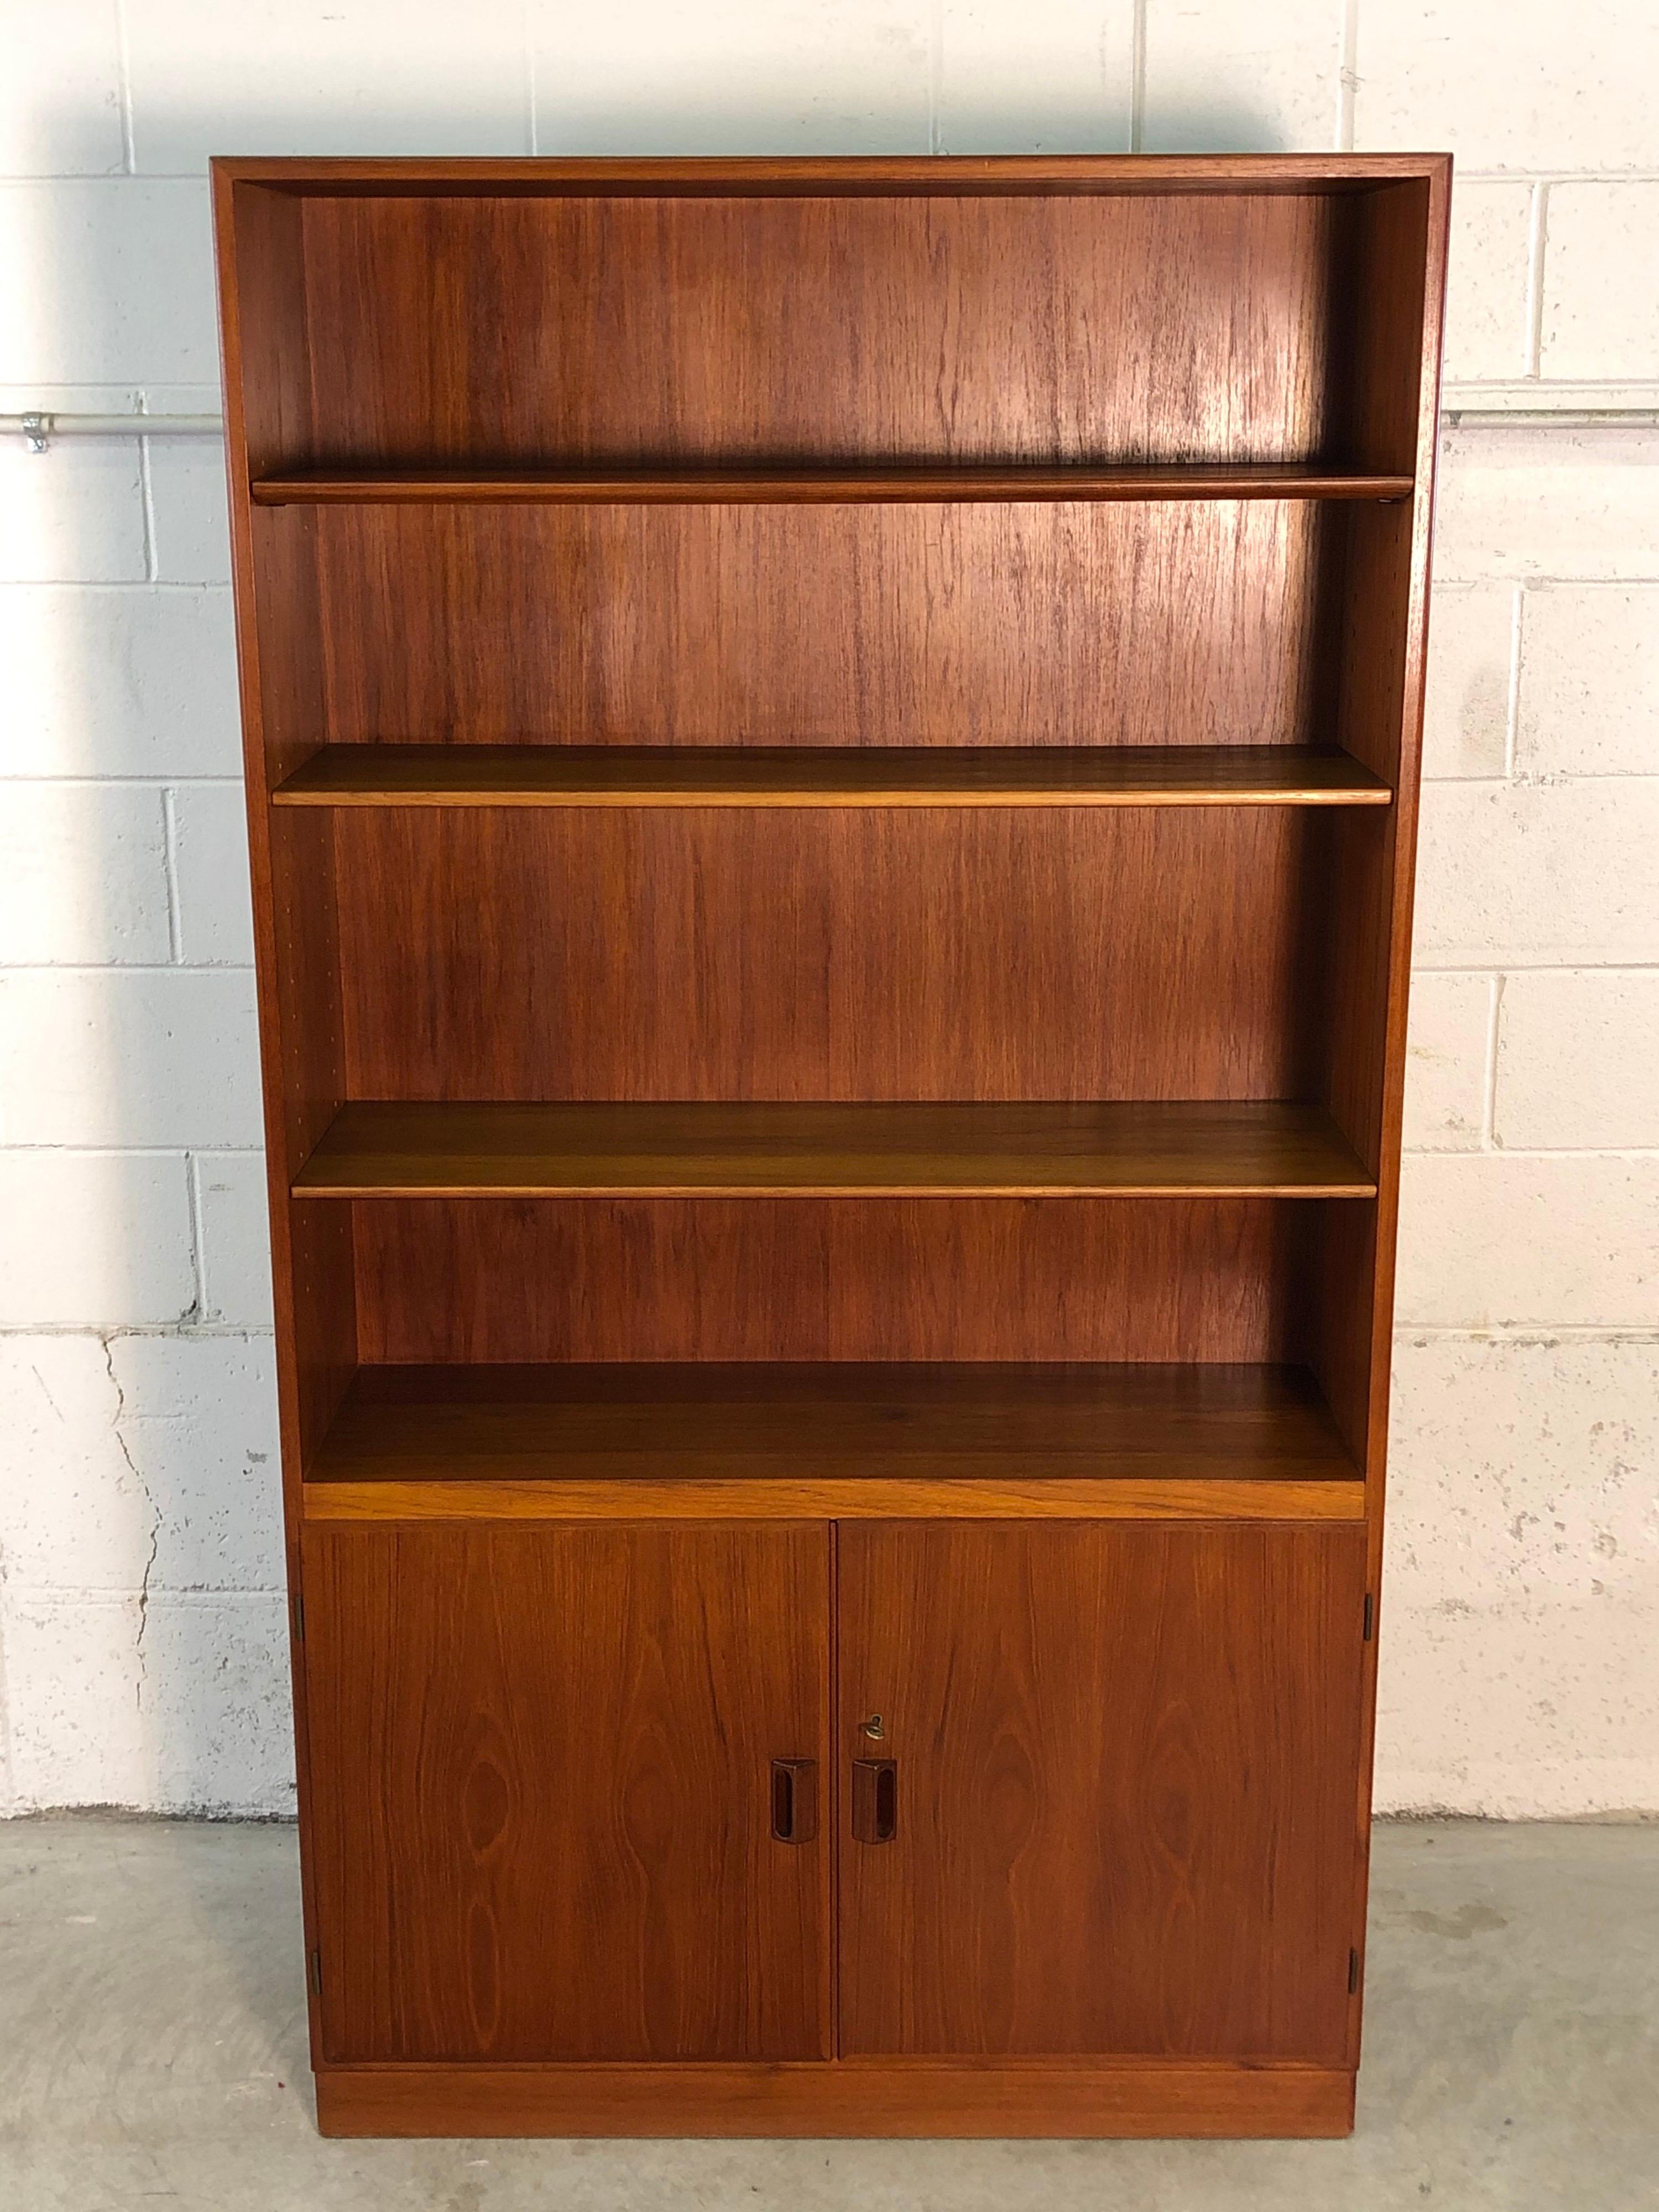 Vintage Danish teak tall bookcase cabinet designed by Børge Mogensen for Povl Dinesen Furniture Co. The bookcase has three adjustable shelves on top and one adjustable shelf underneath. Great Mogensen designed pulls and comes with the key that locks